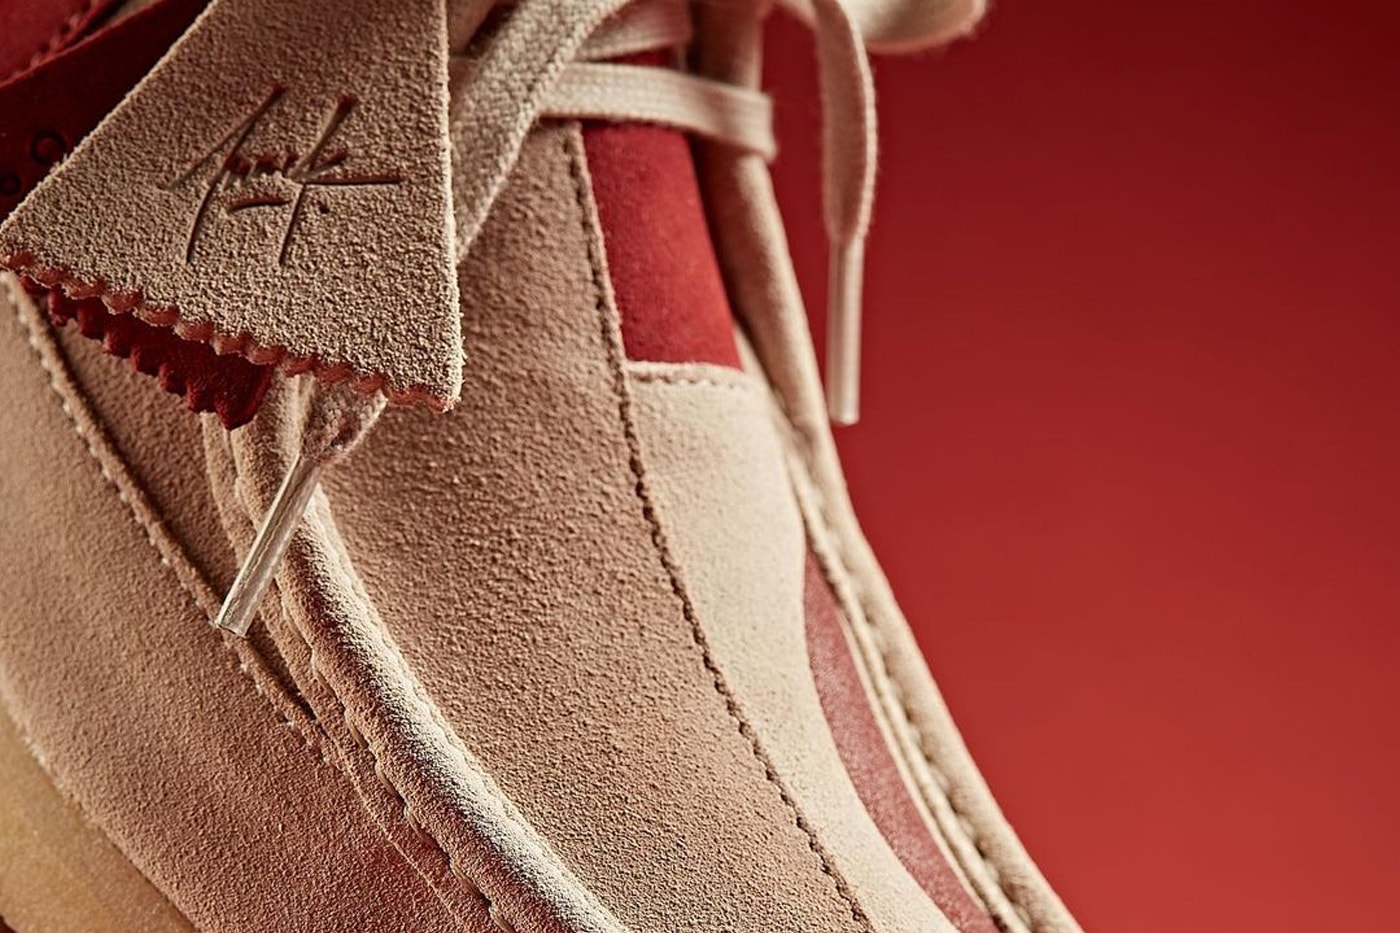 Clarks Originals Cooks Up Burger-Inspired Boot With Vandy The Pink